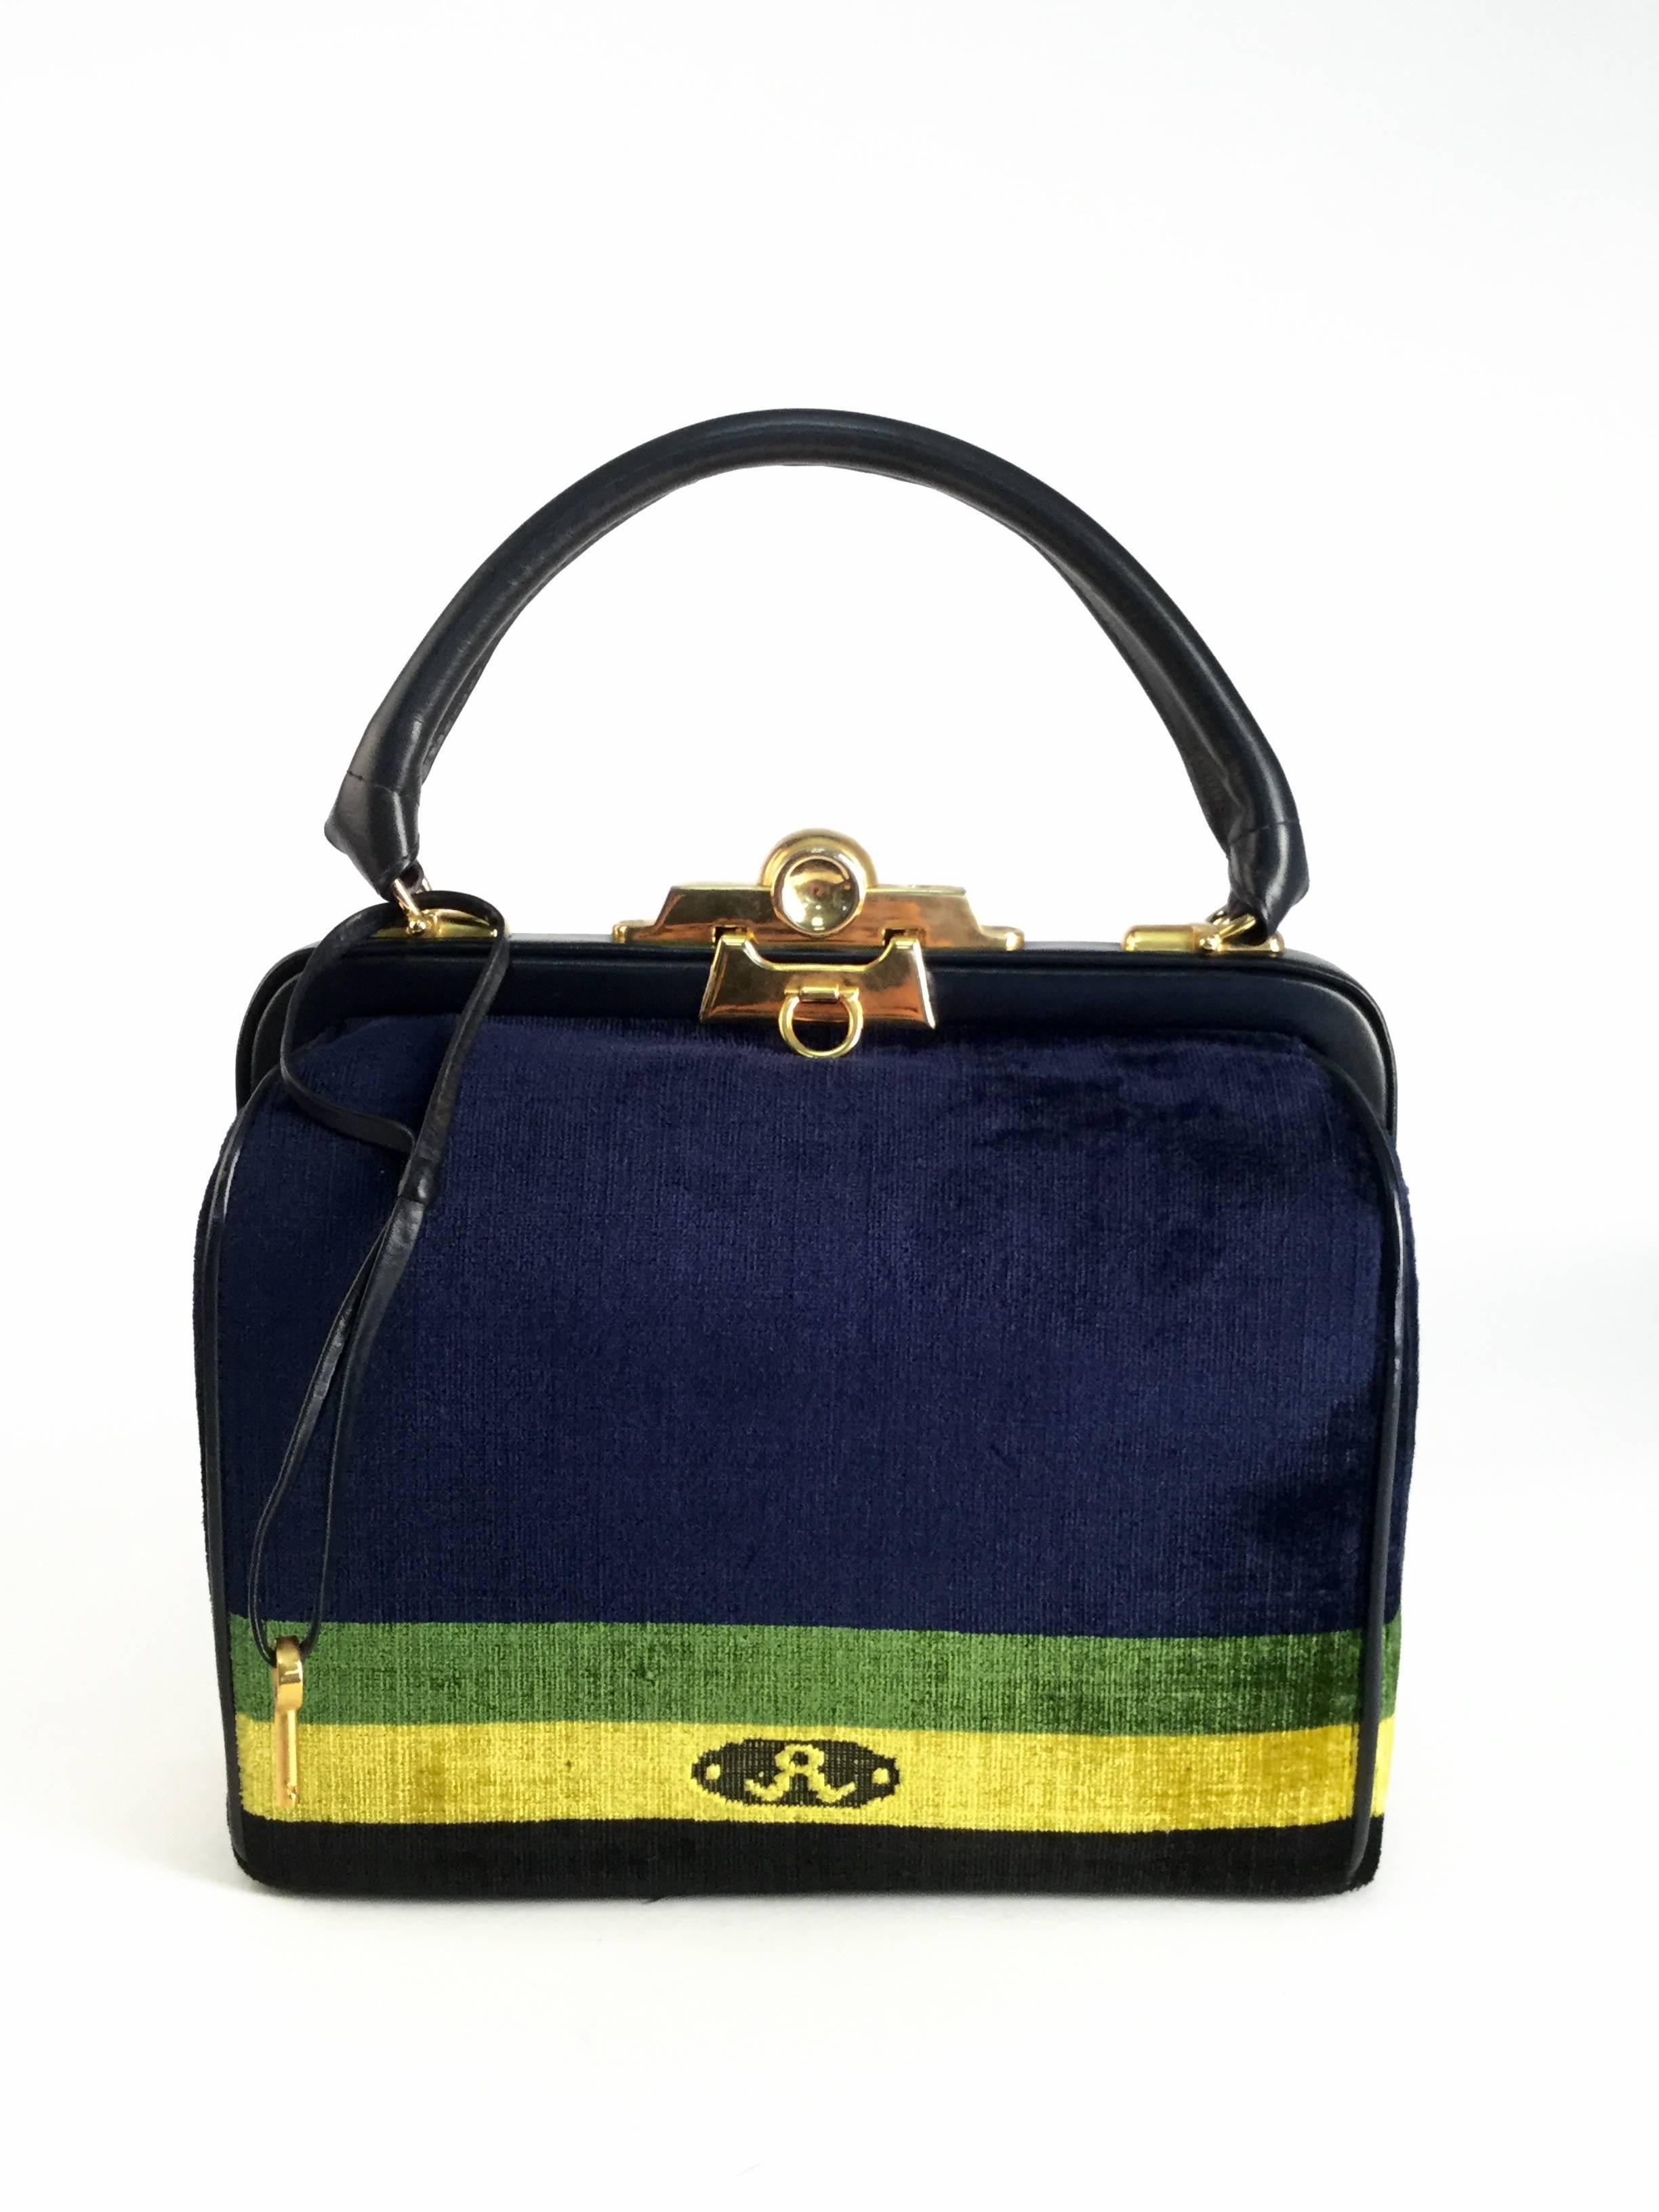 
This vintage purse by Roberta di Camerino is a beautiful luxurious, plush, and absolutely stunning interpretation of the classic austere doctor bag! The distinctive Roberta di Camerino "R" logo is situated on the lemon yellow stripe.  The